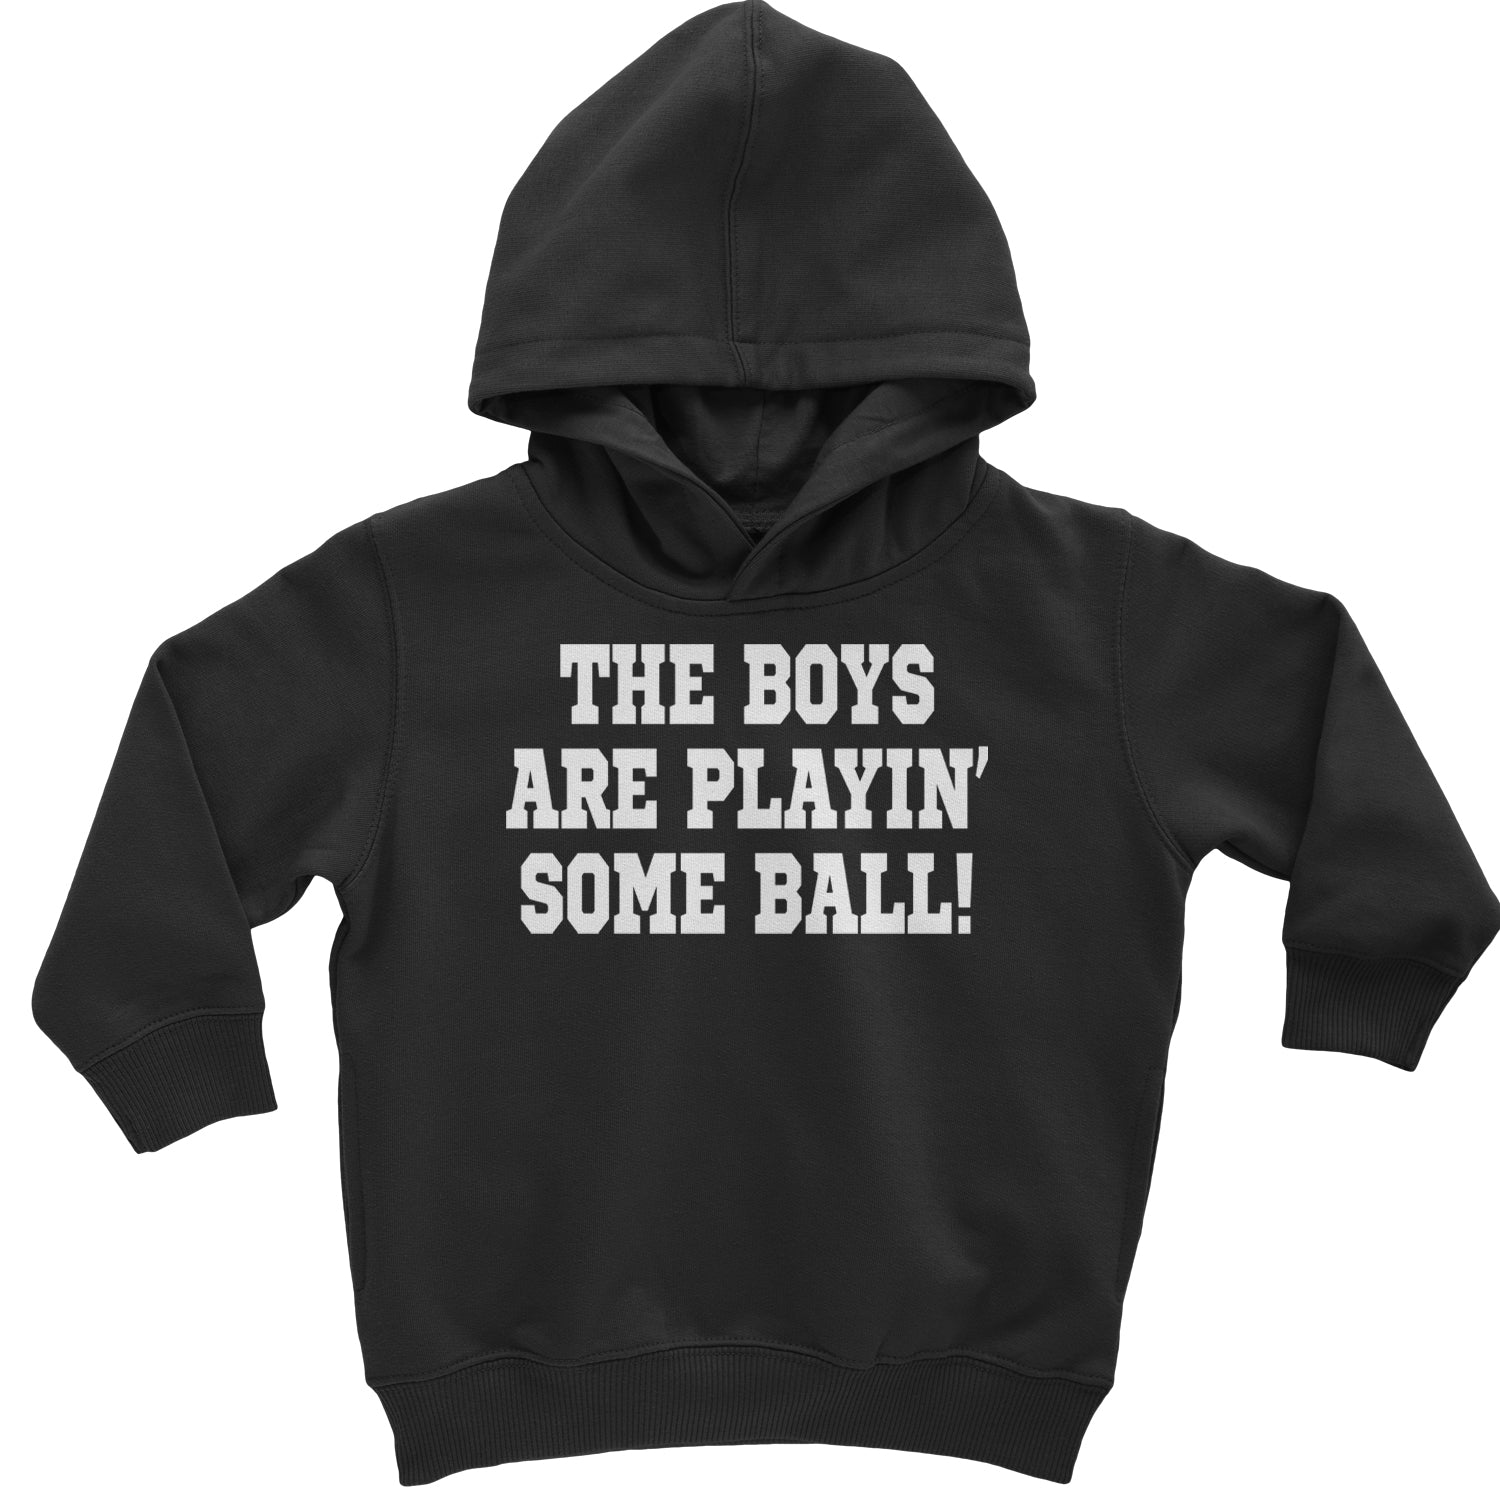 The Boys Are Playing Some Baseball Toddler Hoodie And Infant Fleece Romper